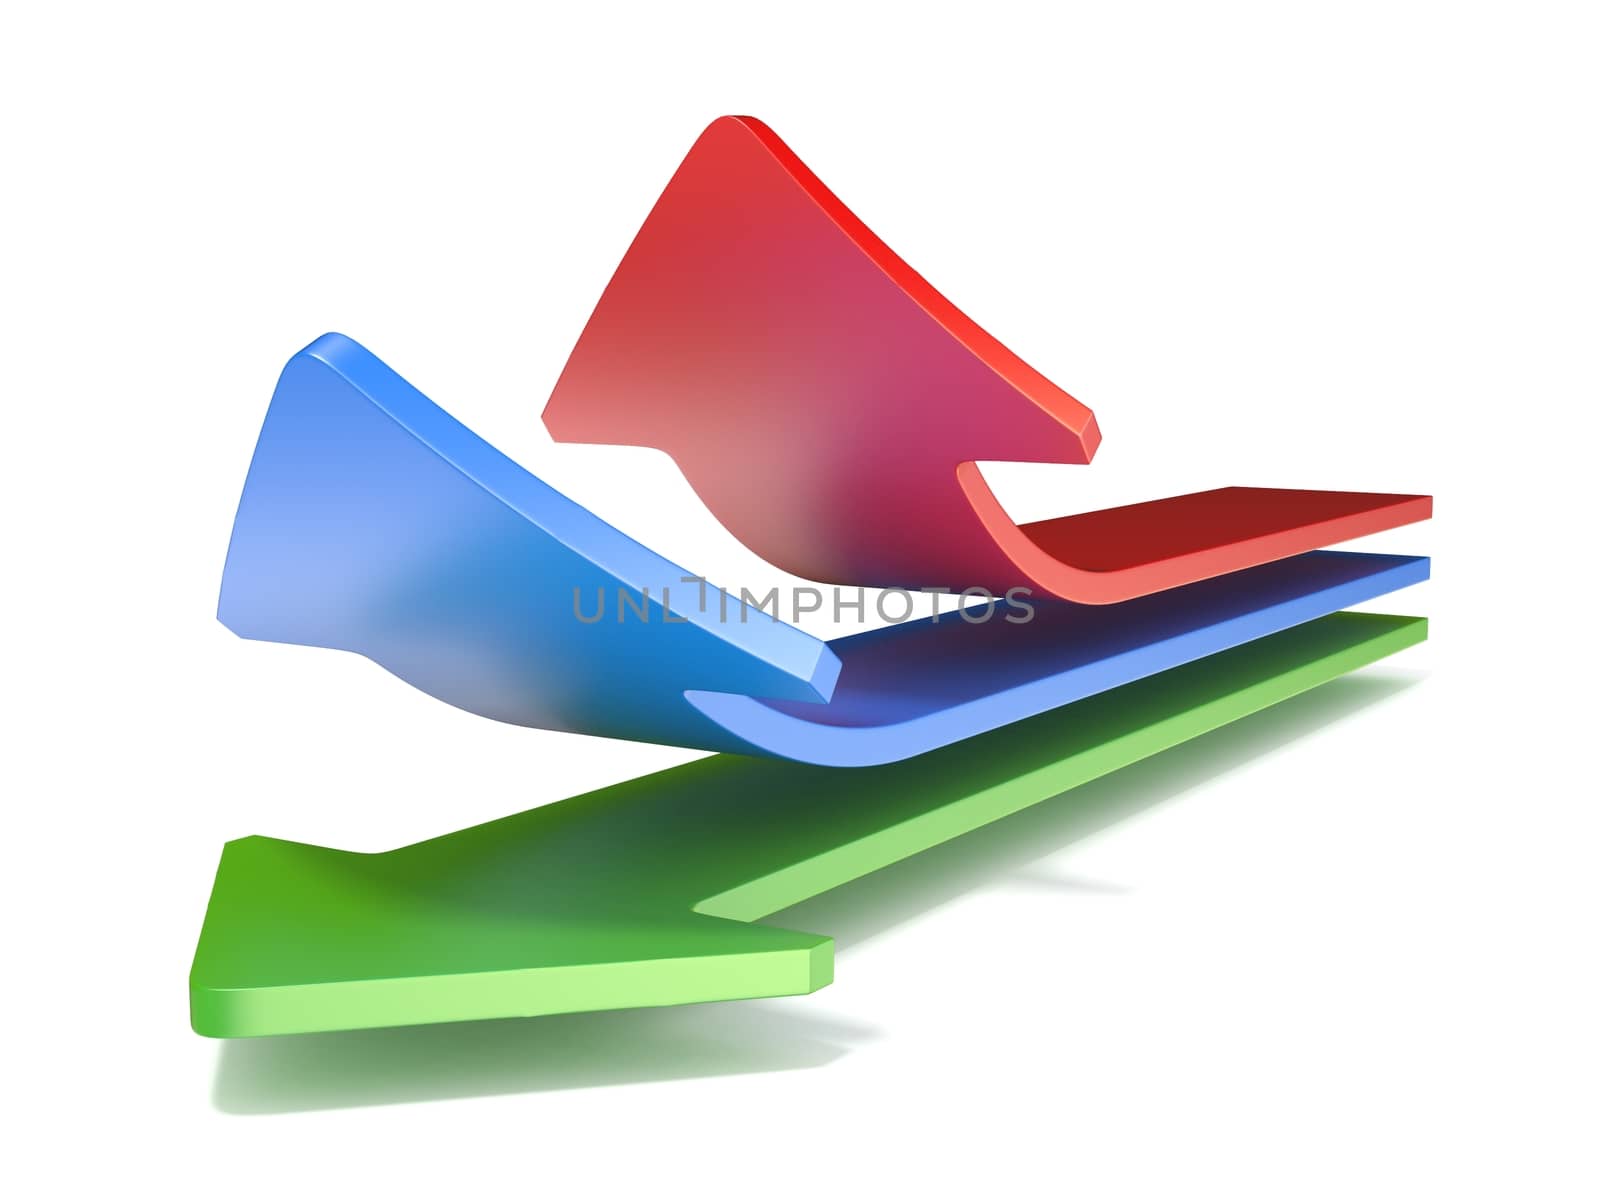 Three way arrows, showing three different directions upward. 3D render illustration isolated on white background